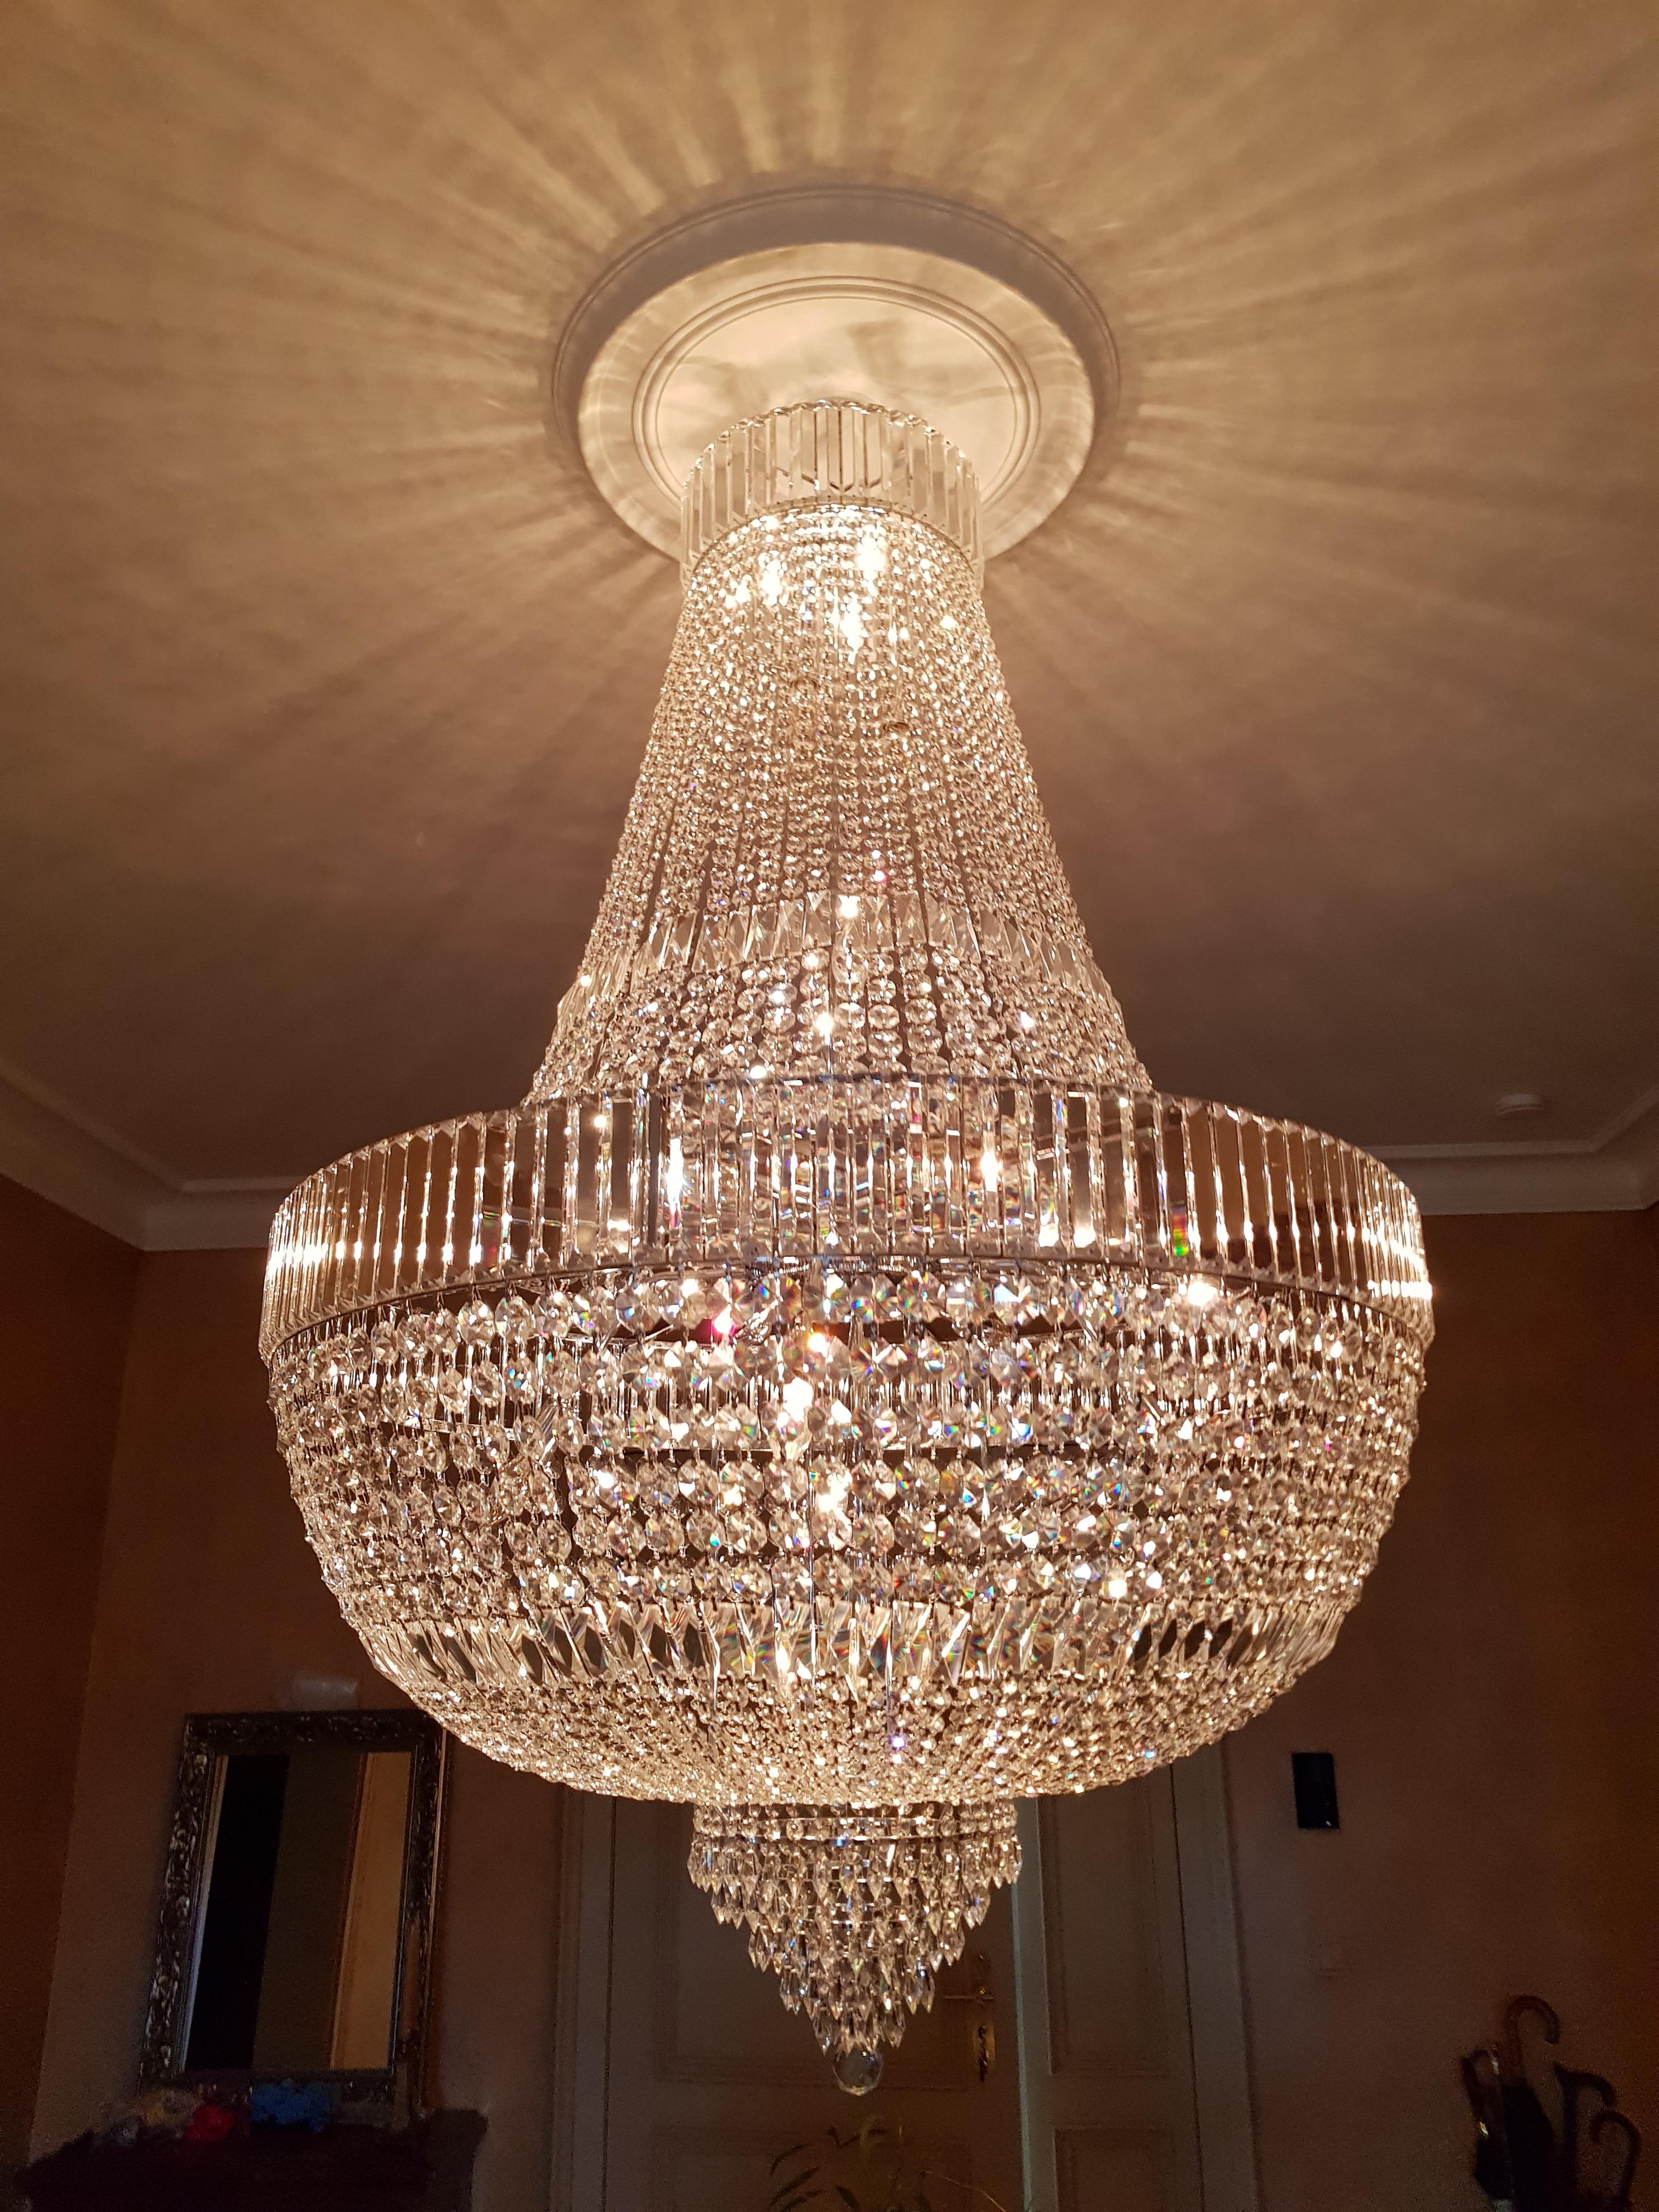 Art Deco Crystal Chandelier - Empire Elegance in Customizable Sizes

Introducing a new Art Deco crystal style chandelier that captures the grandeur of the Empire era while offering modern sophistication. Crafted with exquisite lead crystal, this